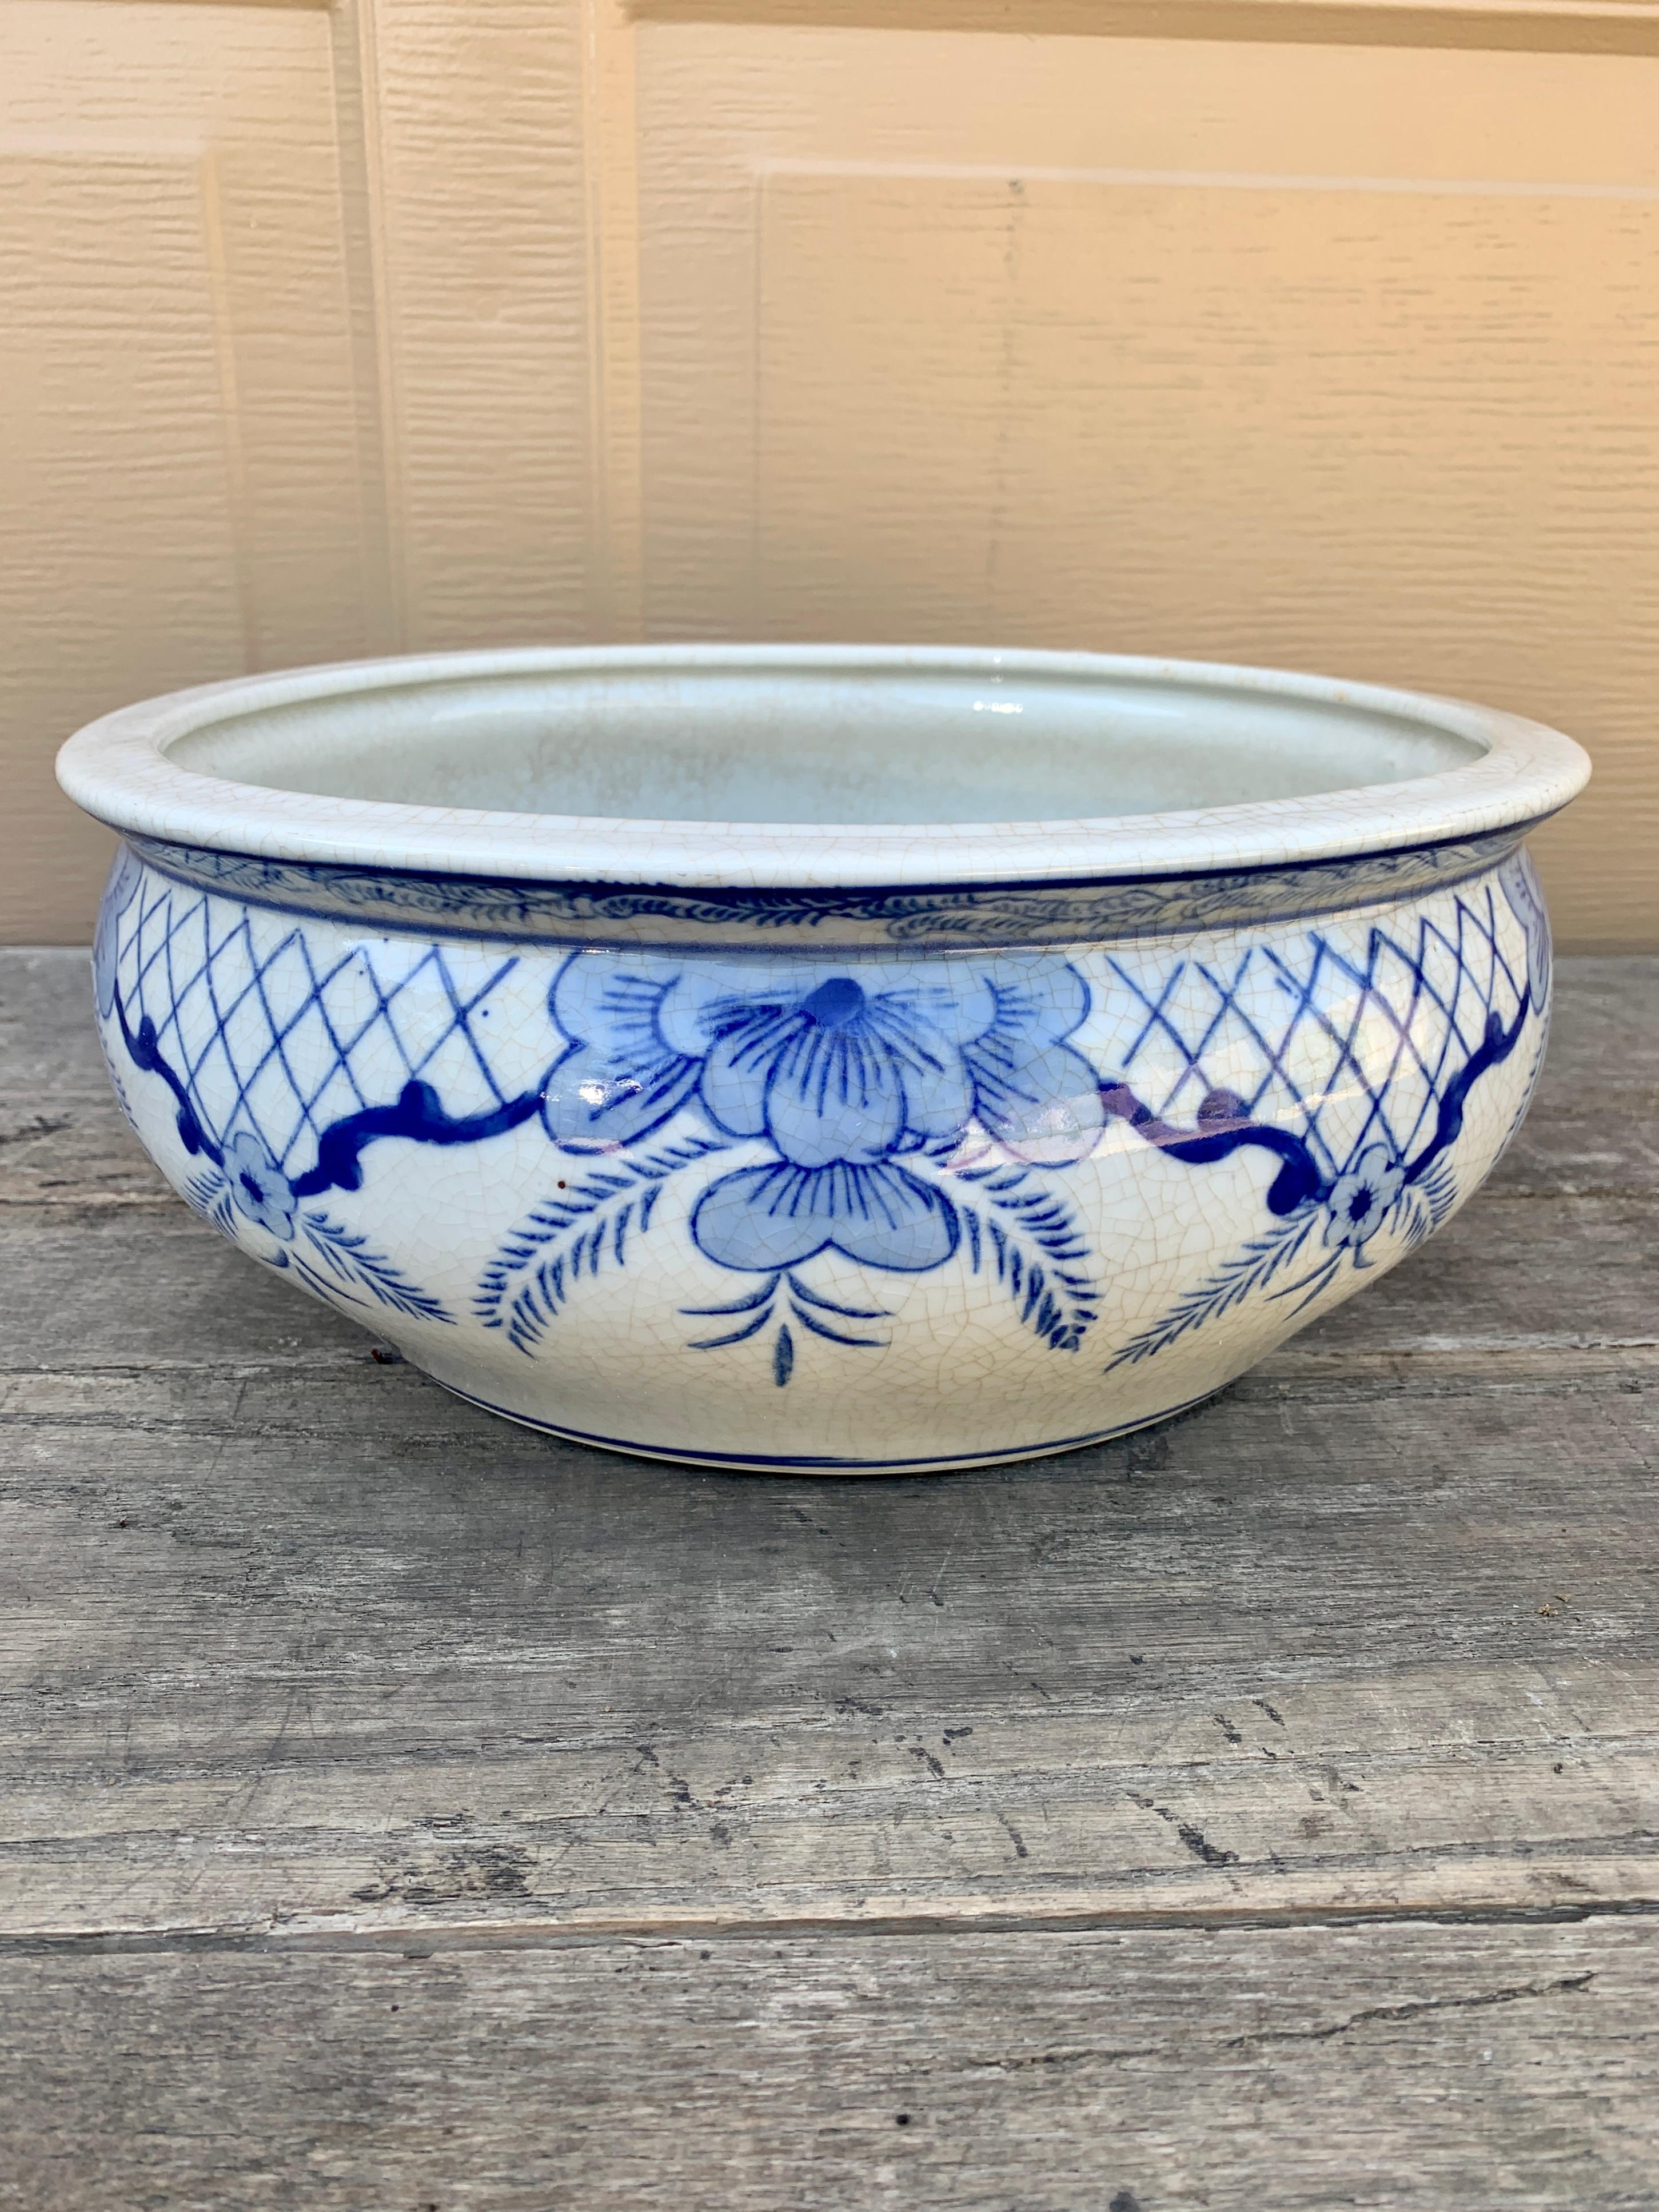 A gorgeous blue and white porcelain Chinoiserie planter, cachepot or garden pot

USA, Late-20th Century

Measures: 12